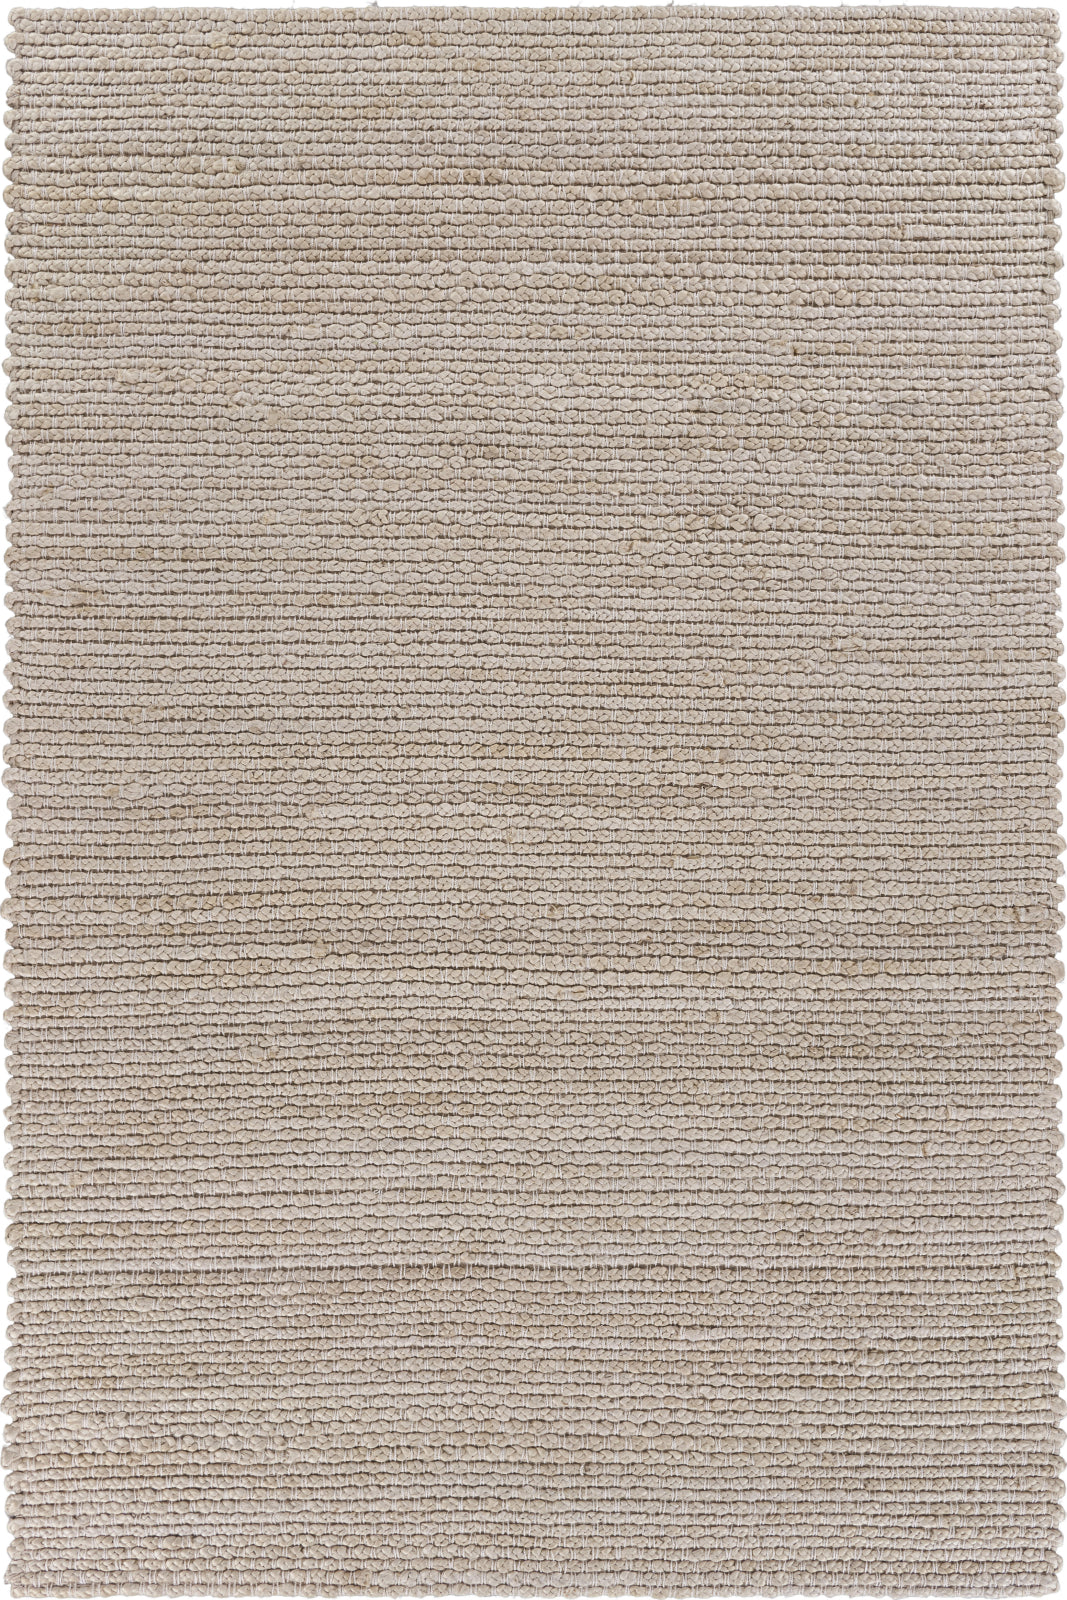 LR Resources Bleached Naturals Contemporary Jute Bleach / Ivory Area Rug main image